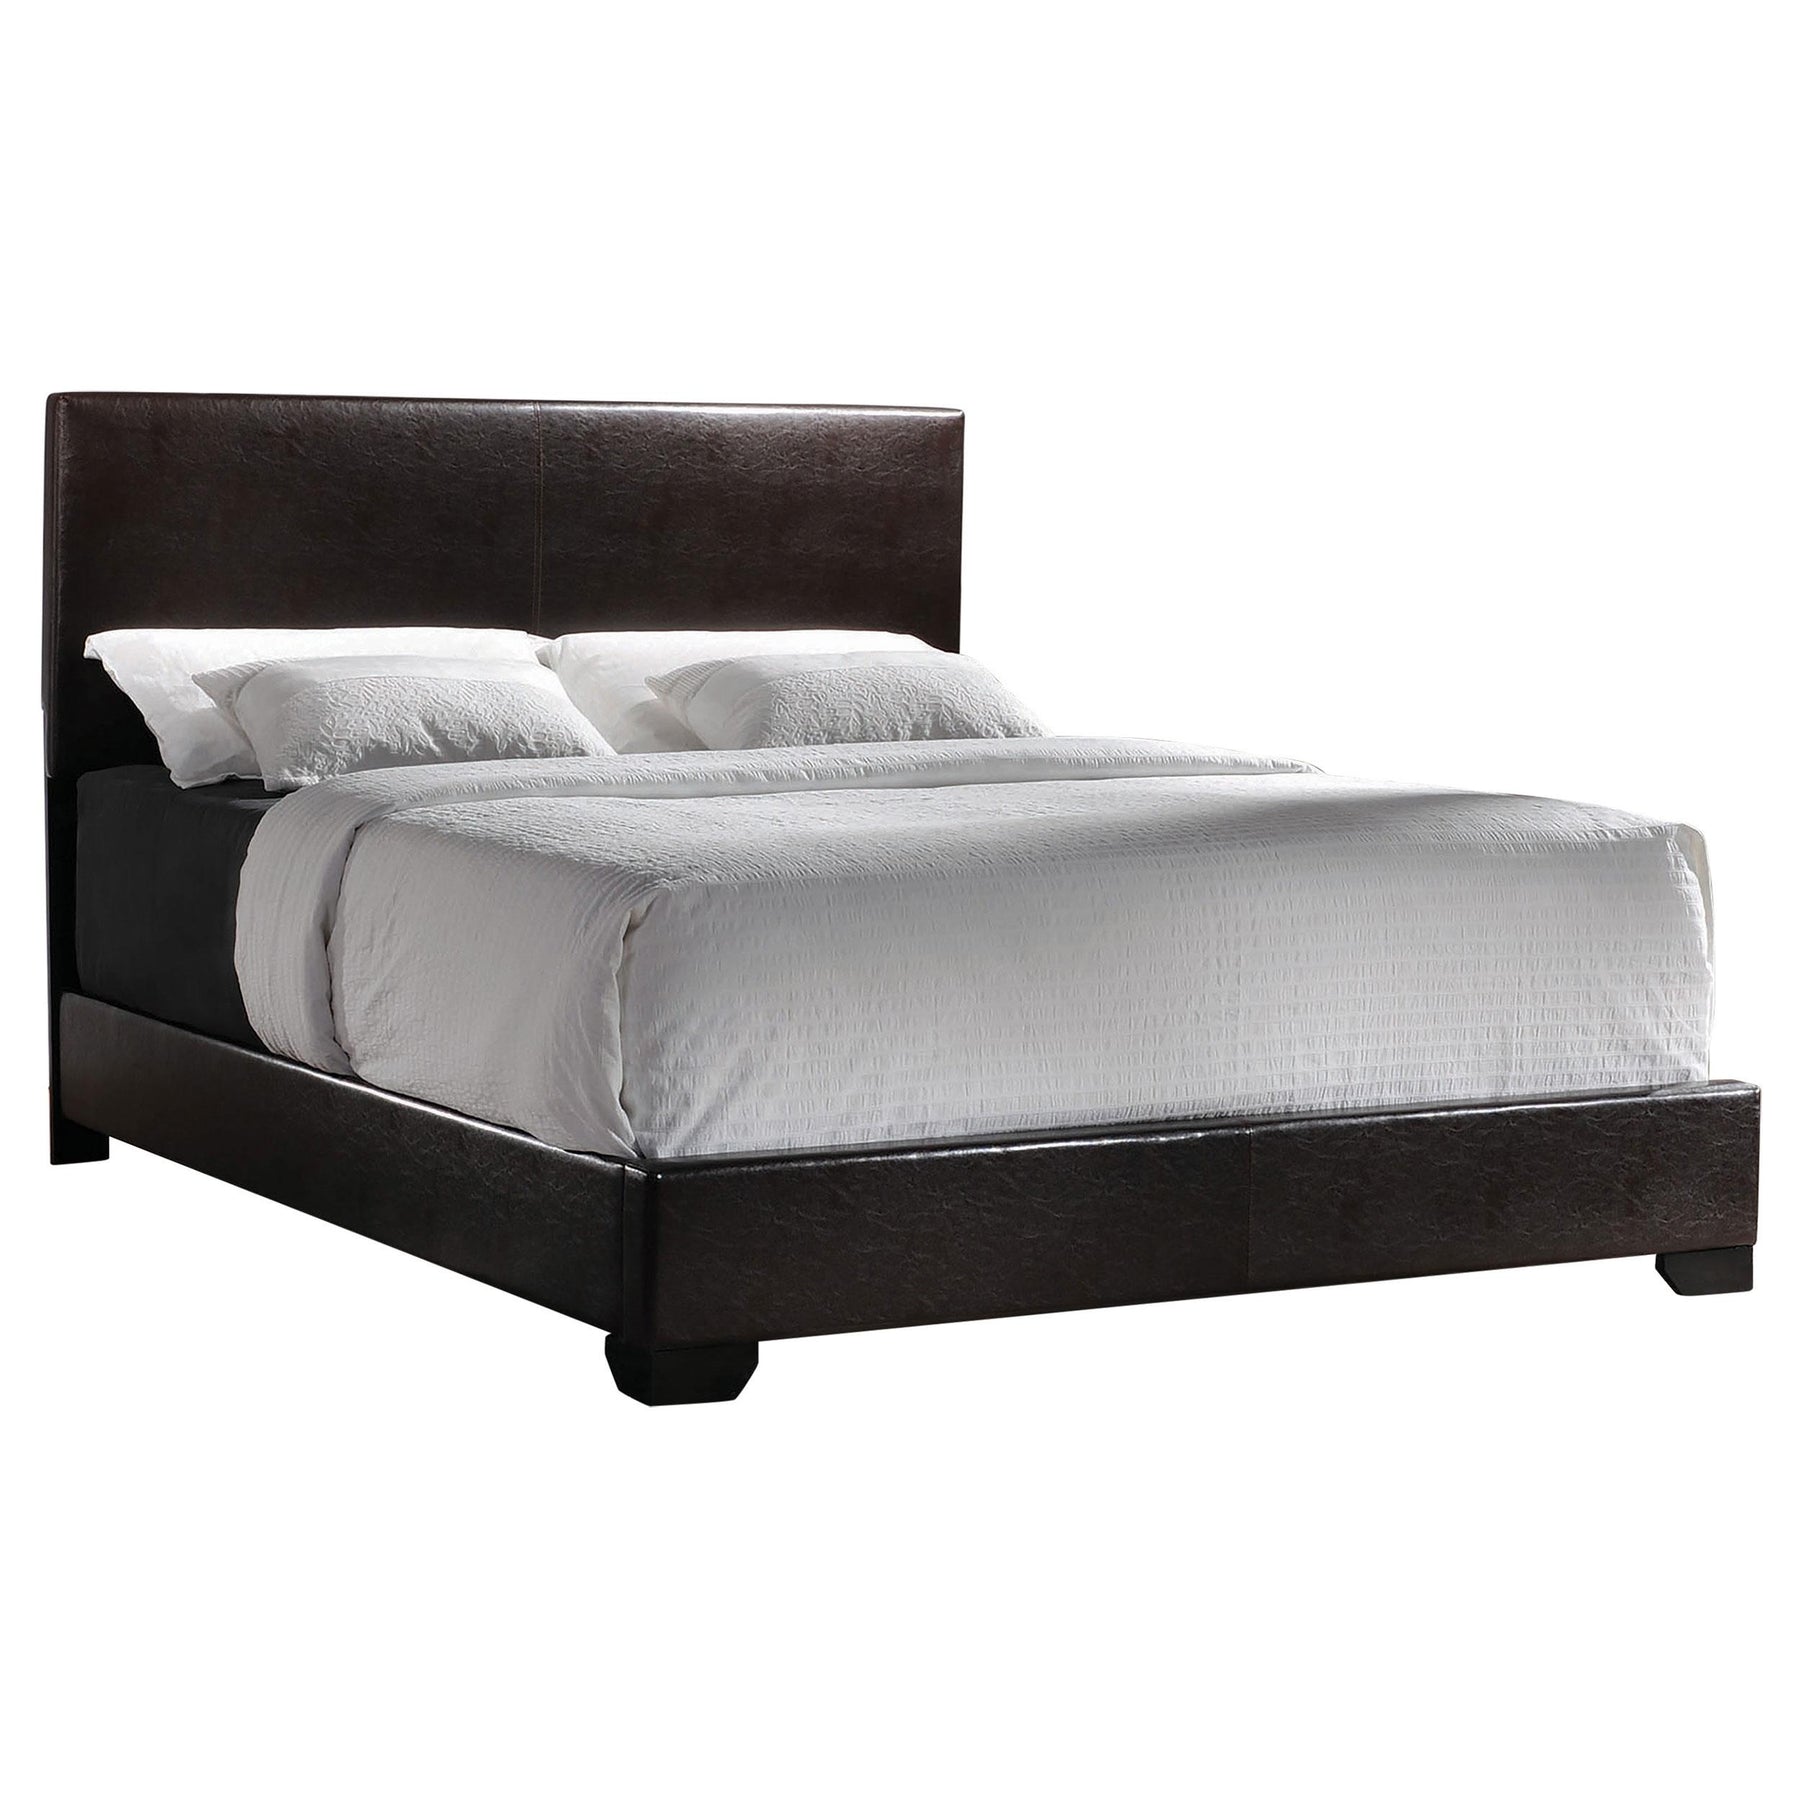 Conner Queen Upholstered Panel Bed Black and Dark Brown  Half Price Furniture